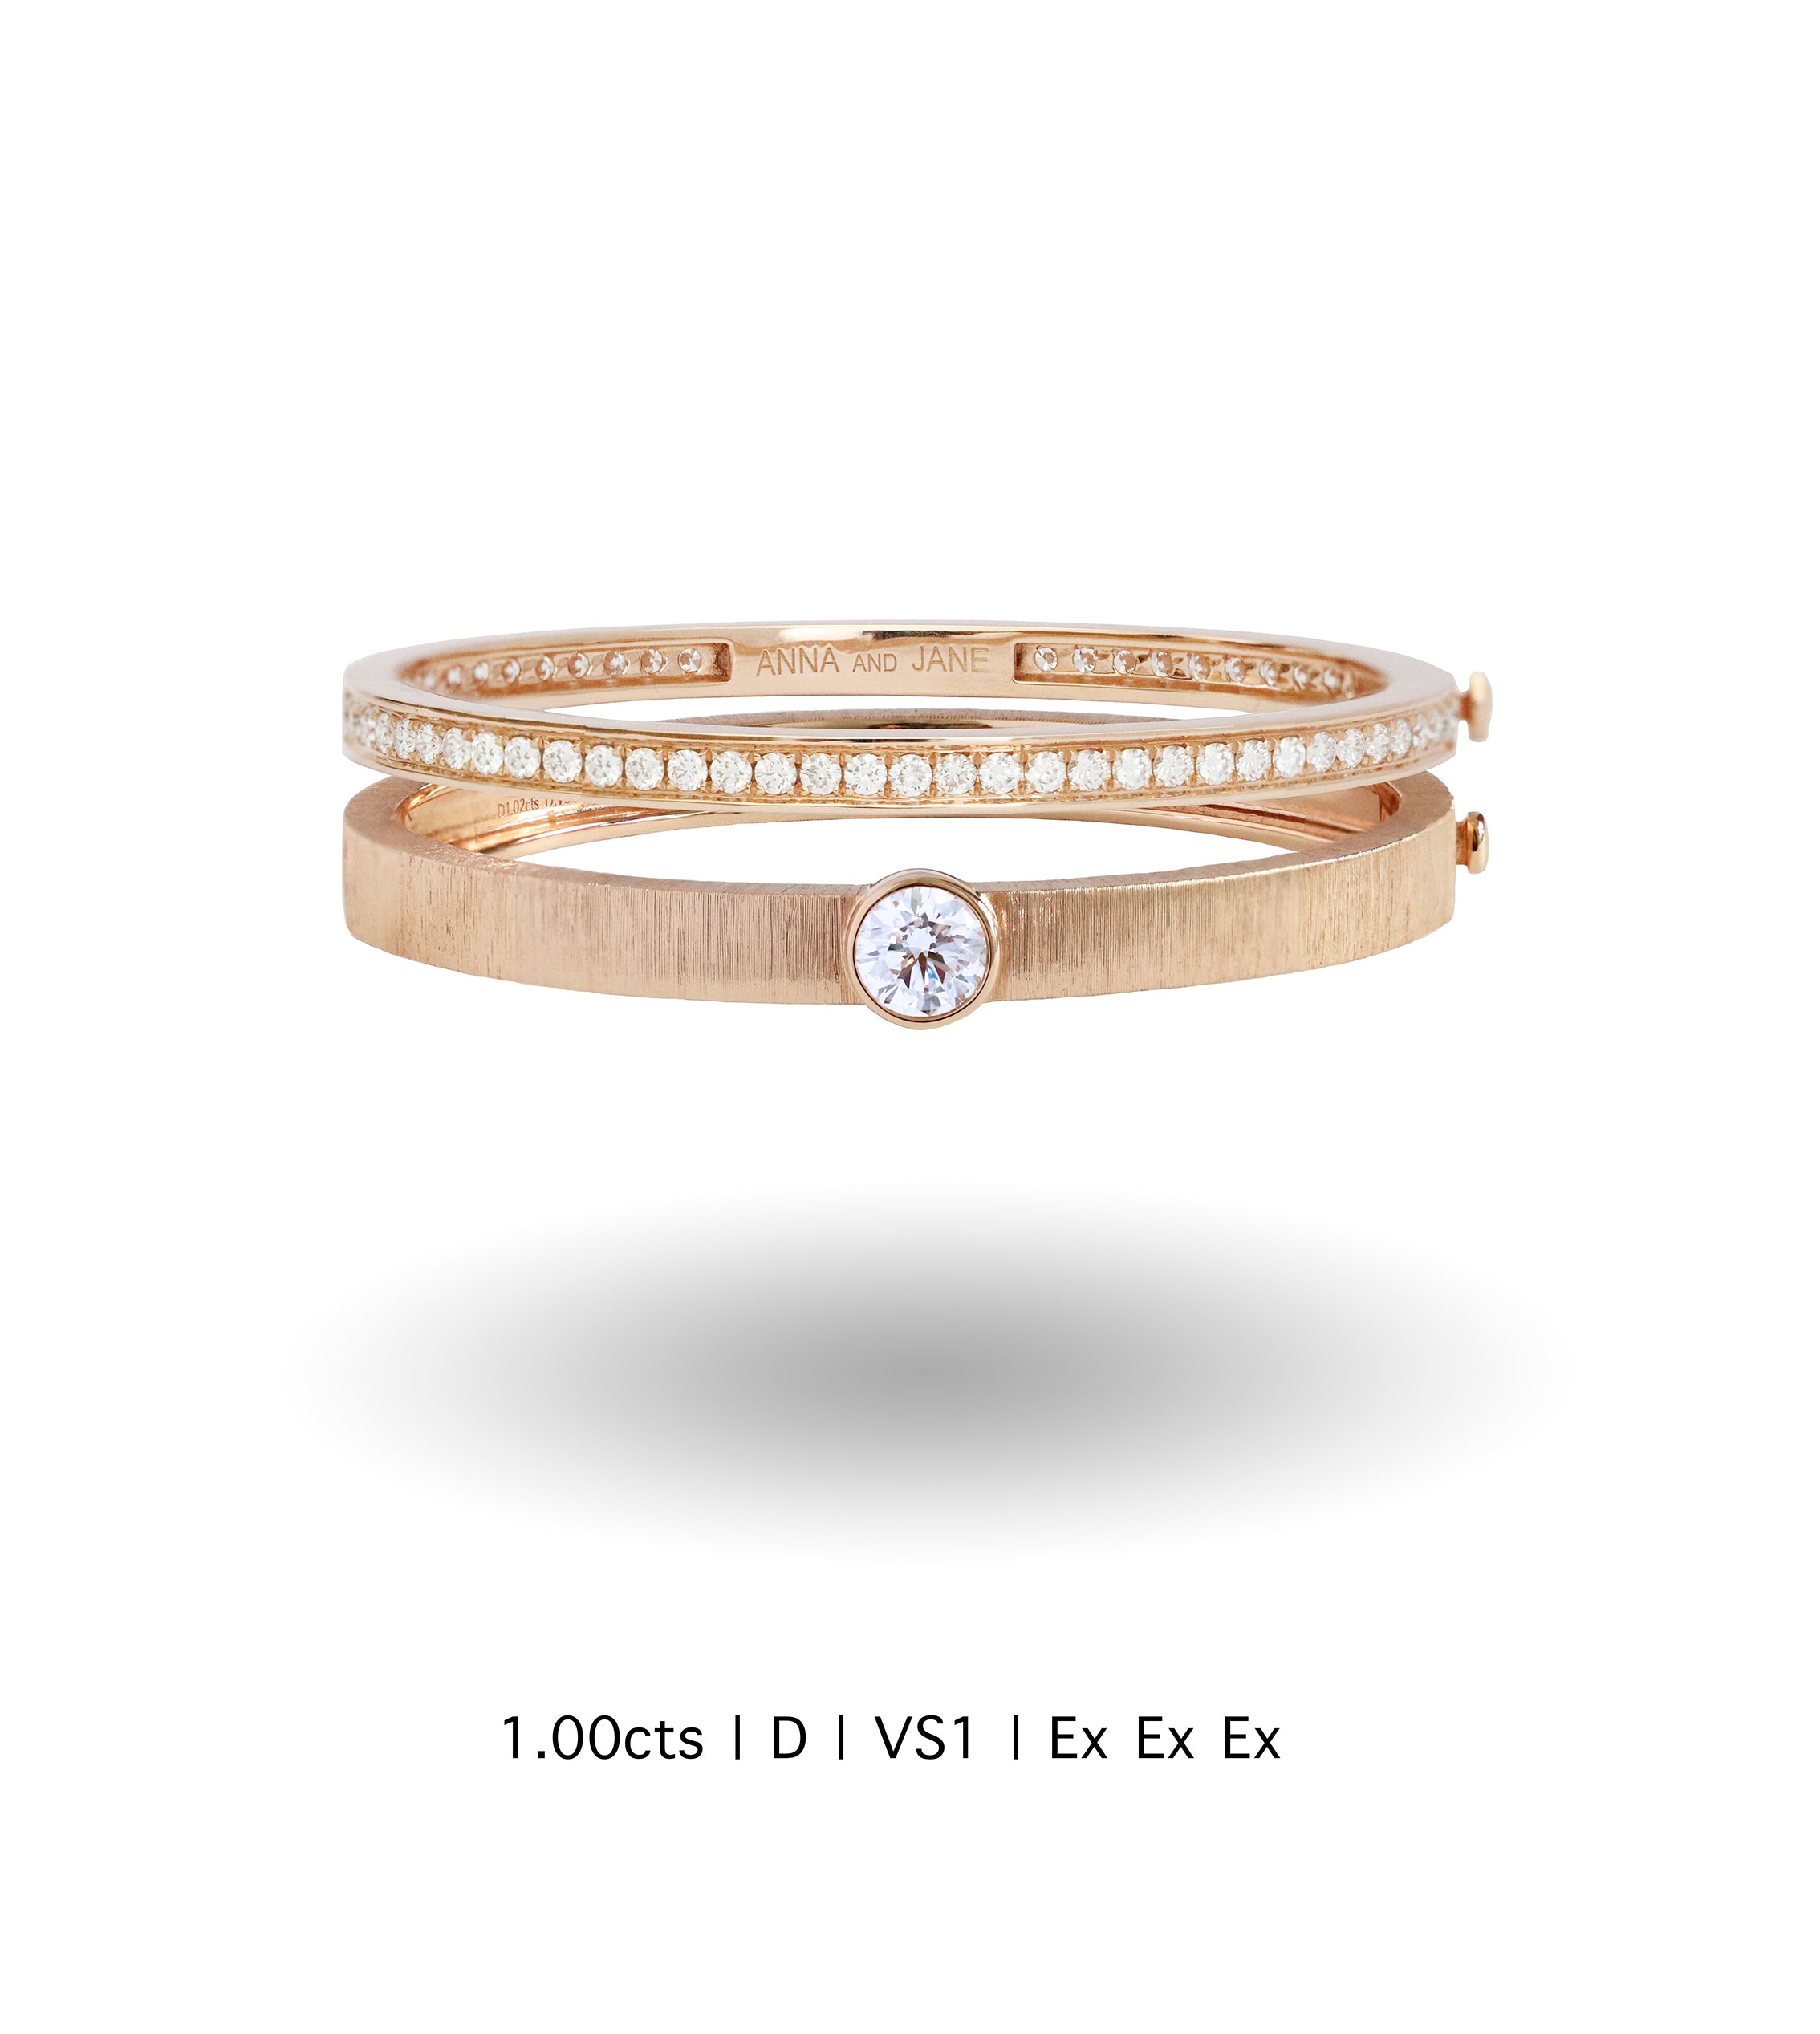 Bespoke GIA Solitaire Diamond Engraved Bangle in Rose Gold